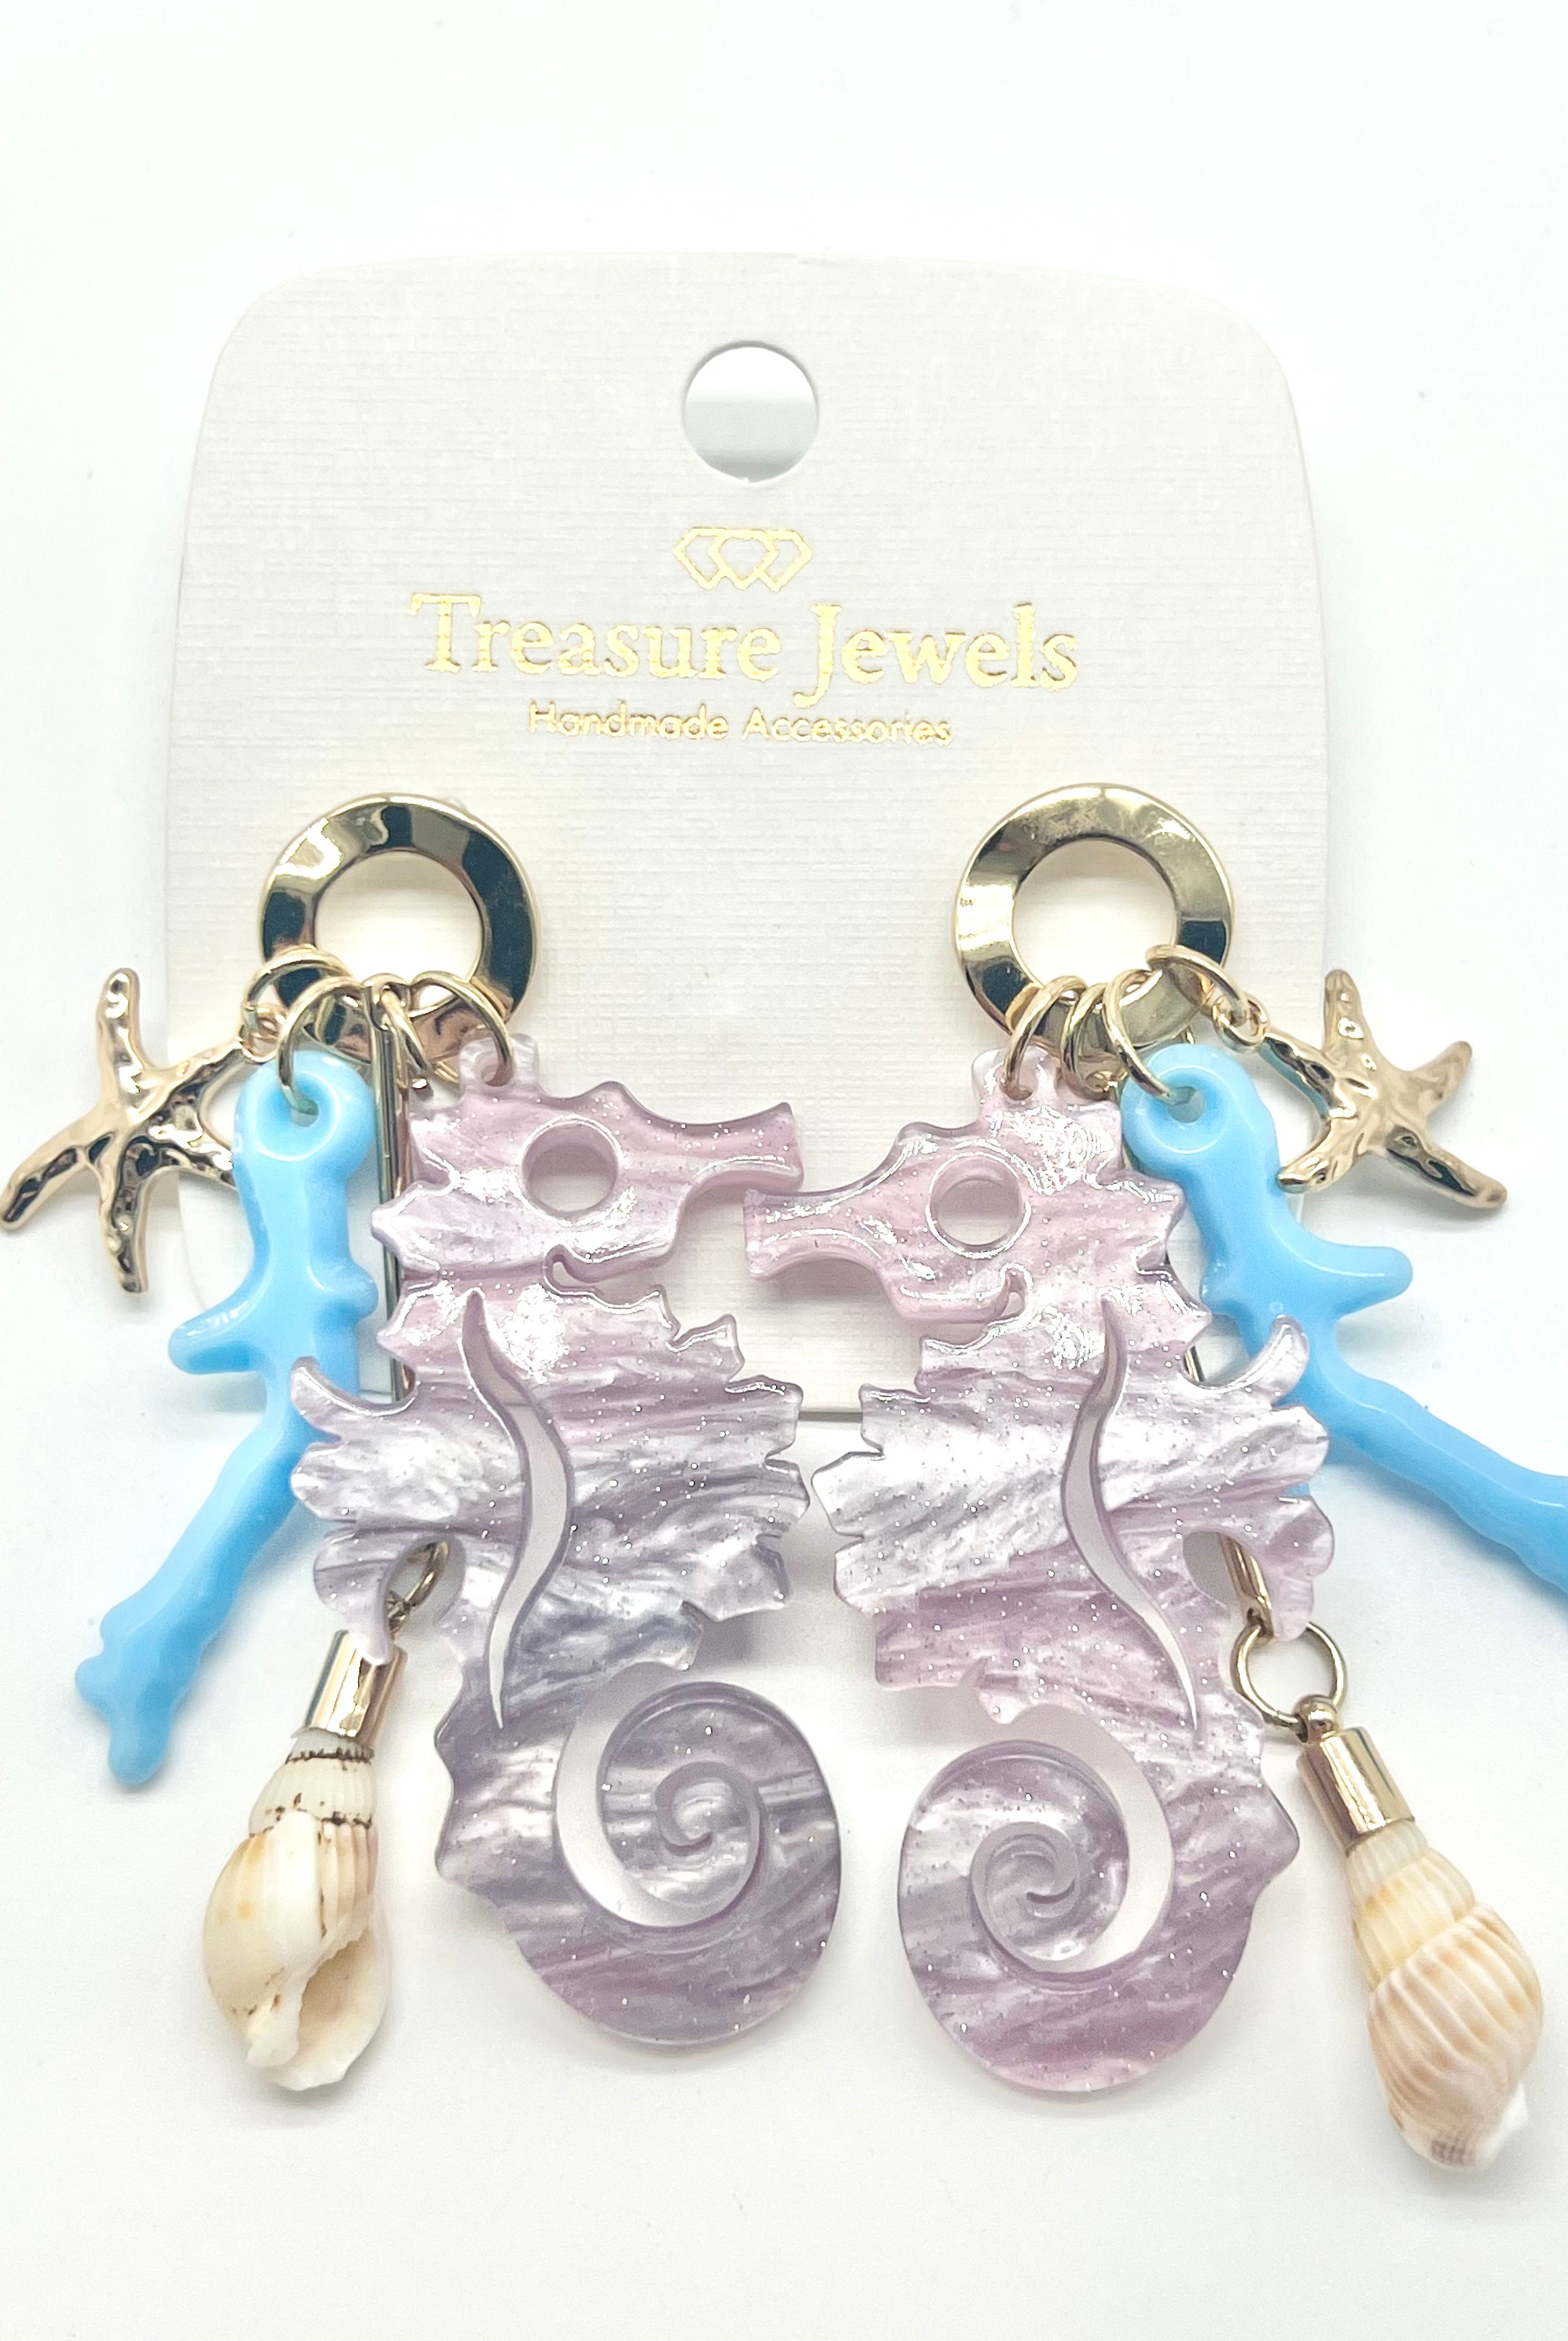 DOORBUSTER: Caballo de Mar Earrings-310 Jewelry-Treasure Jewels-Heathered Boho Boutique, Women's Fashion and Accessories in Palmetto, FL